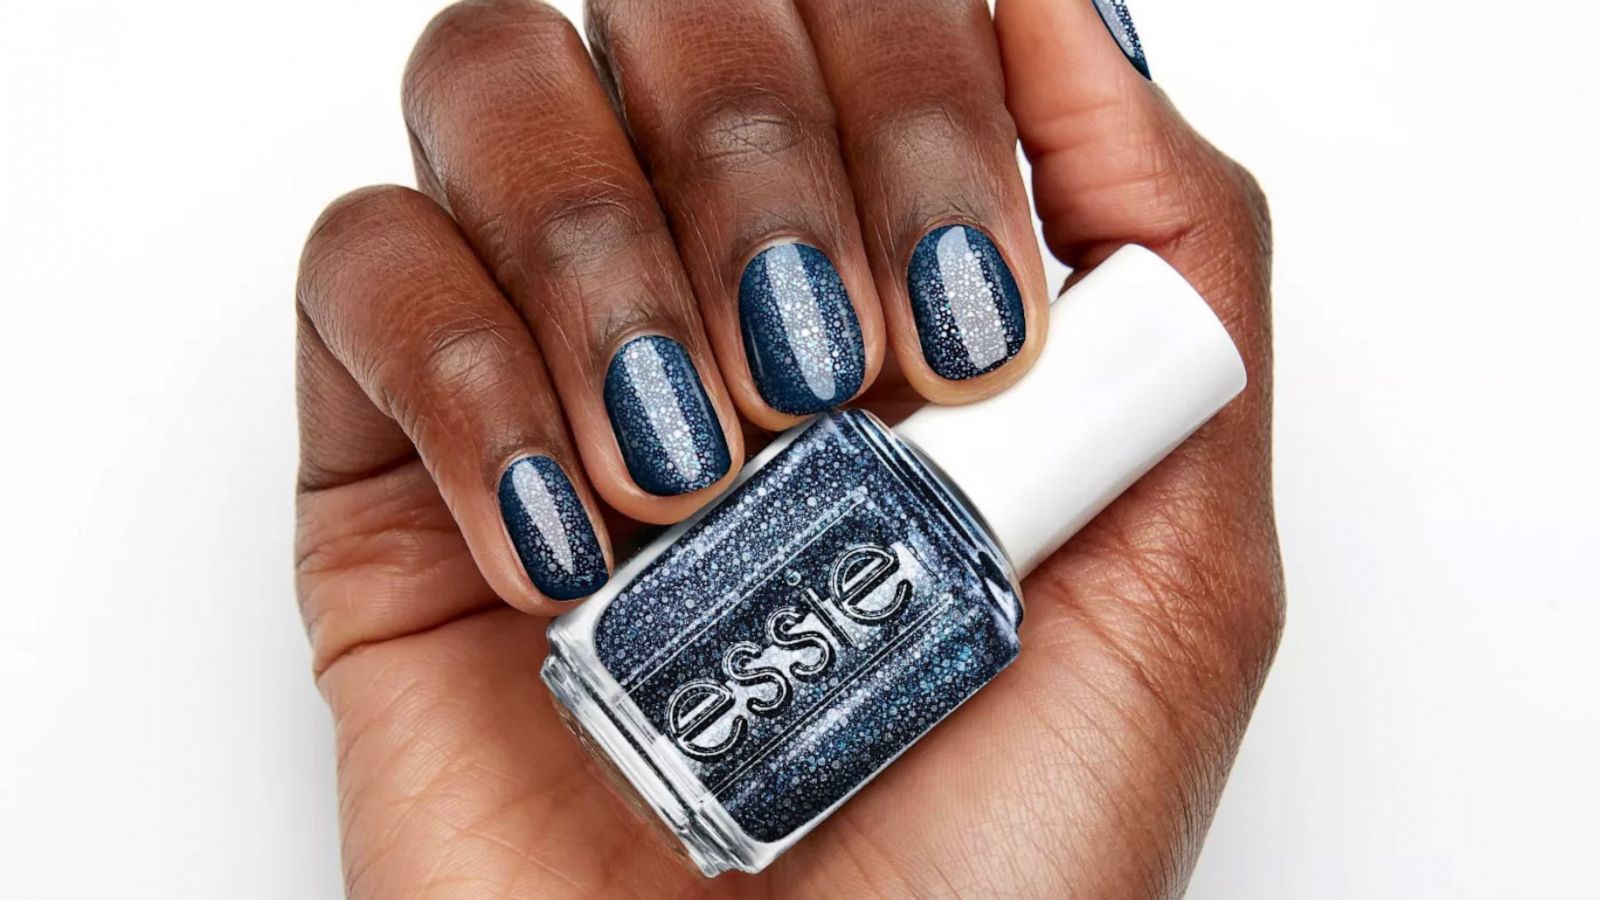 Essie launches nail polish collection to celebrate the rare blue moon -  Good Morning America